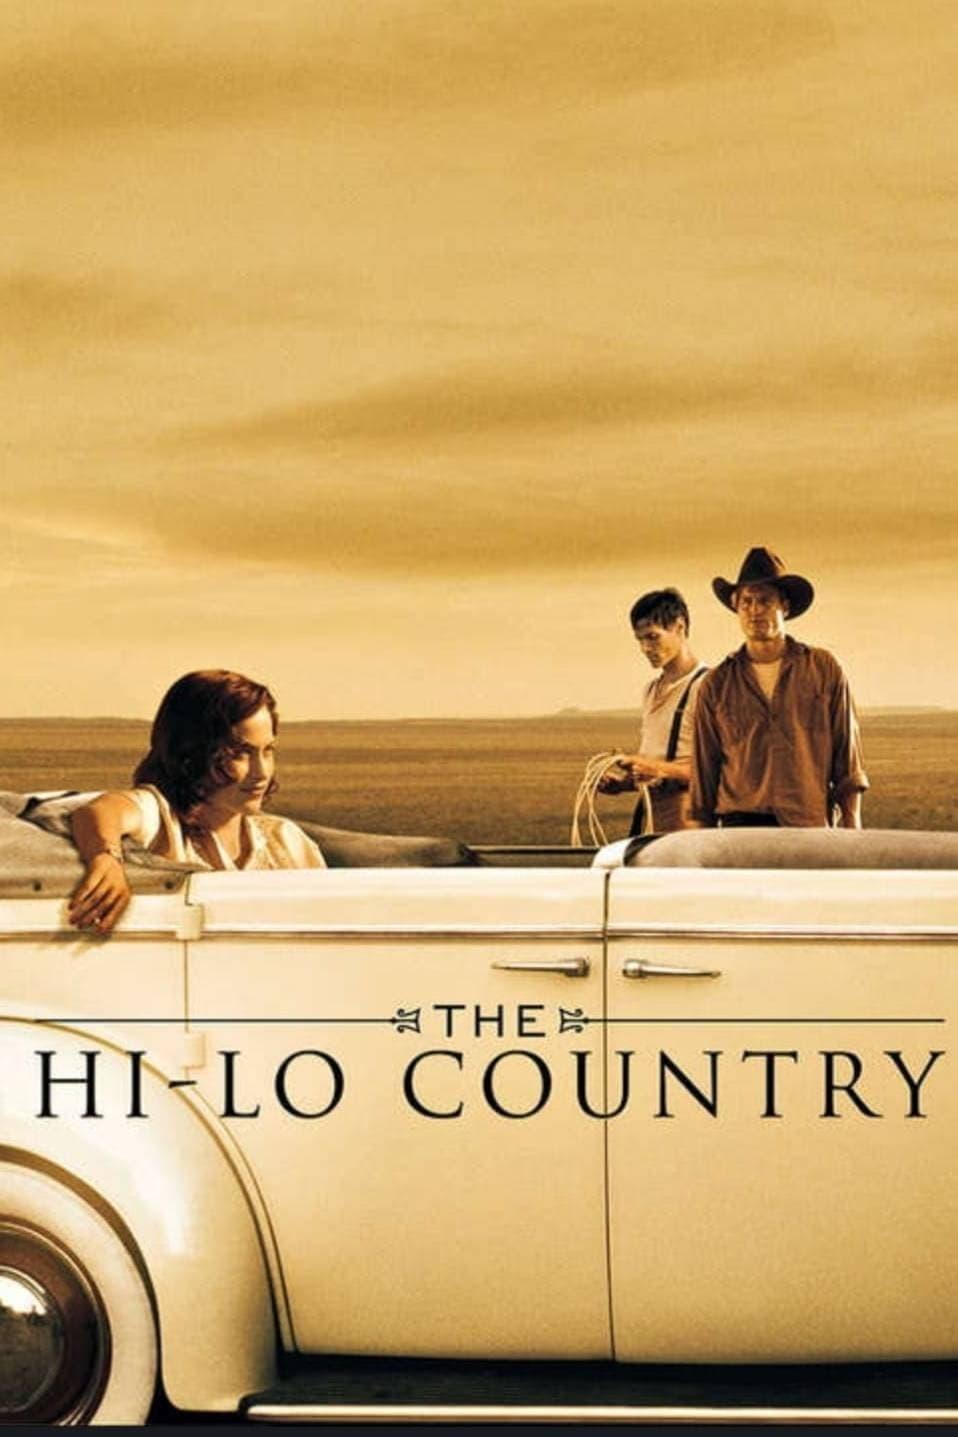 The Hi-Lo Country poster